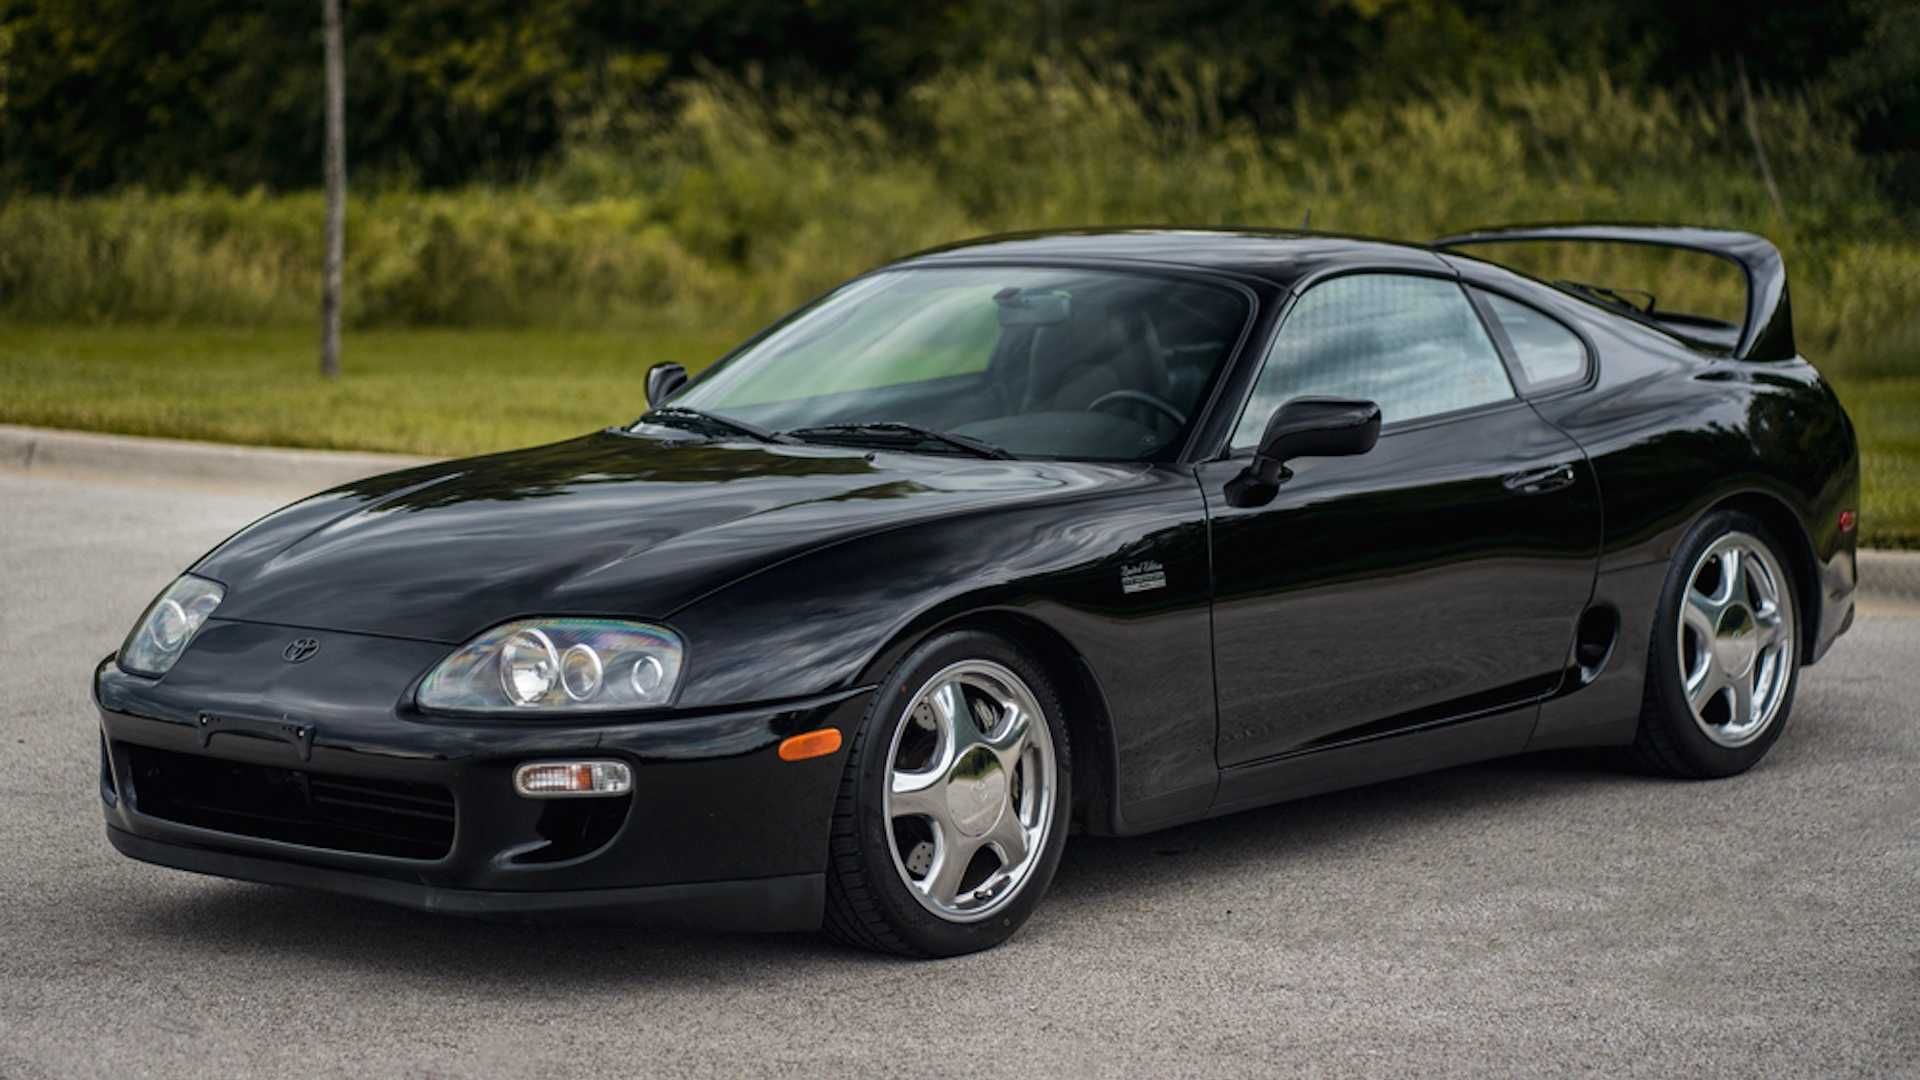 12 Facts About The Toyota Supra MK4 Only Hardcore Car Fans Know